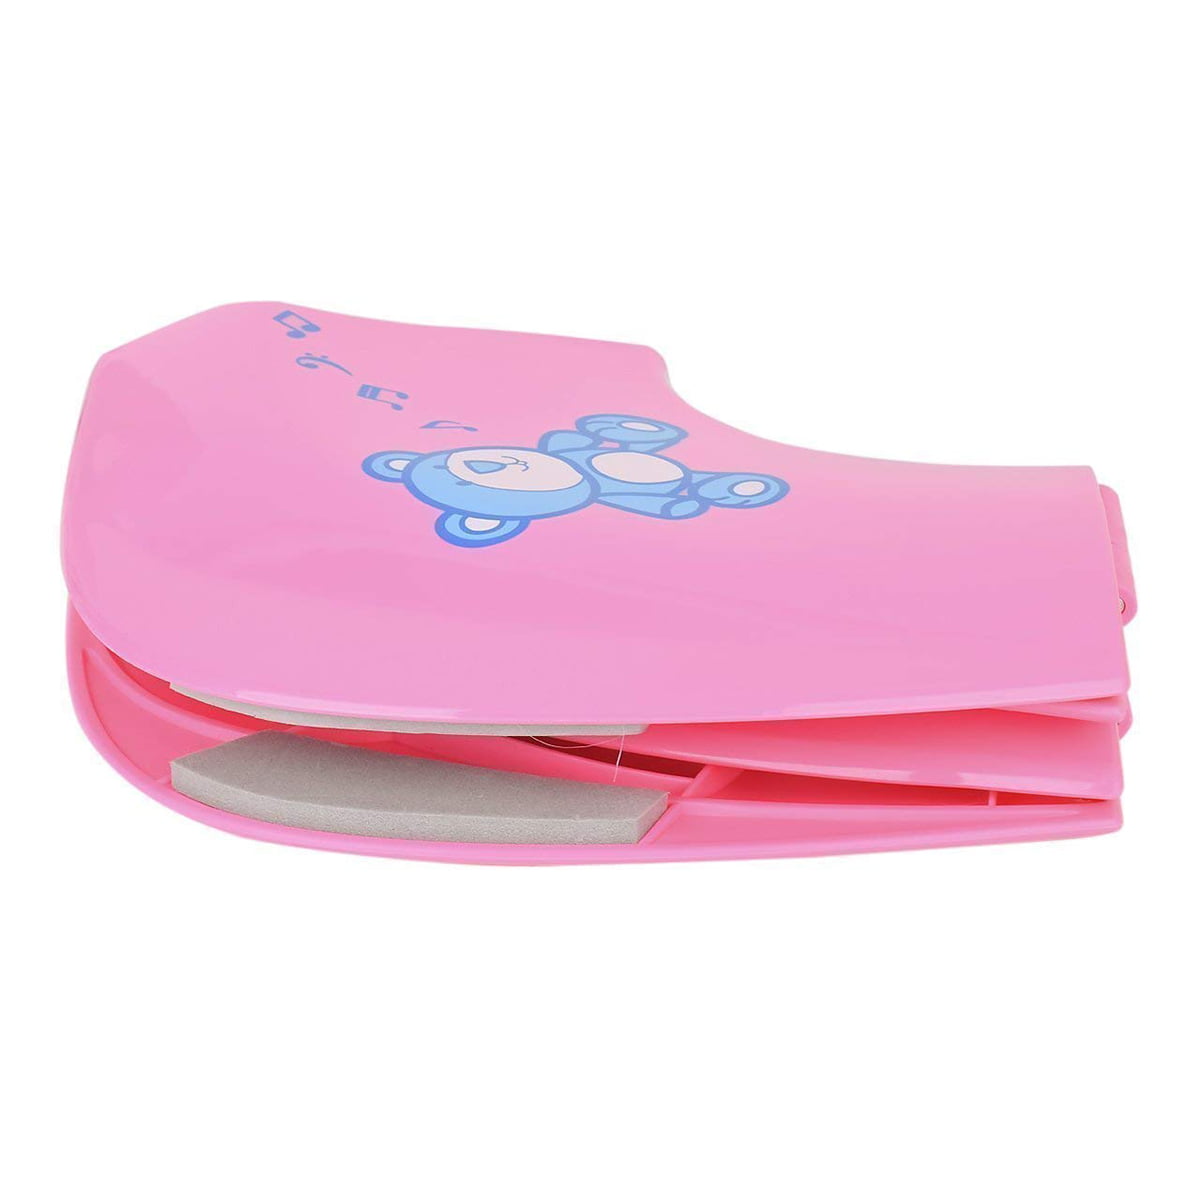 Toddlers and Kids,Pink Ilyever Portable Folding Reusable Travel Toilet Potty Training Seat Covers Liners with Carry Bag for Babies 